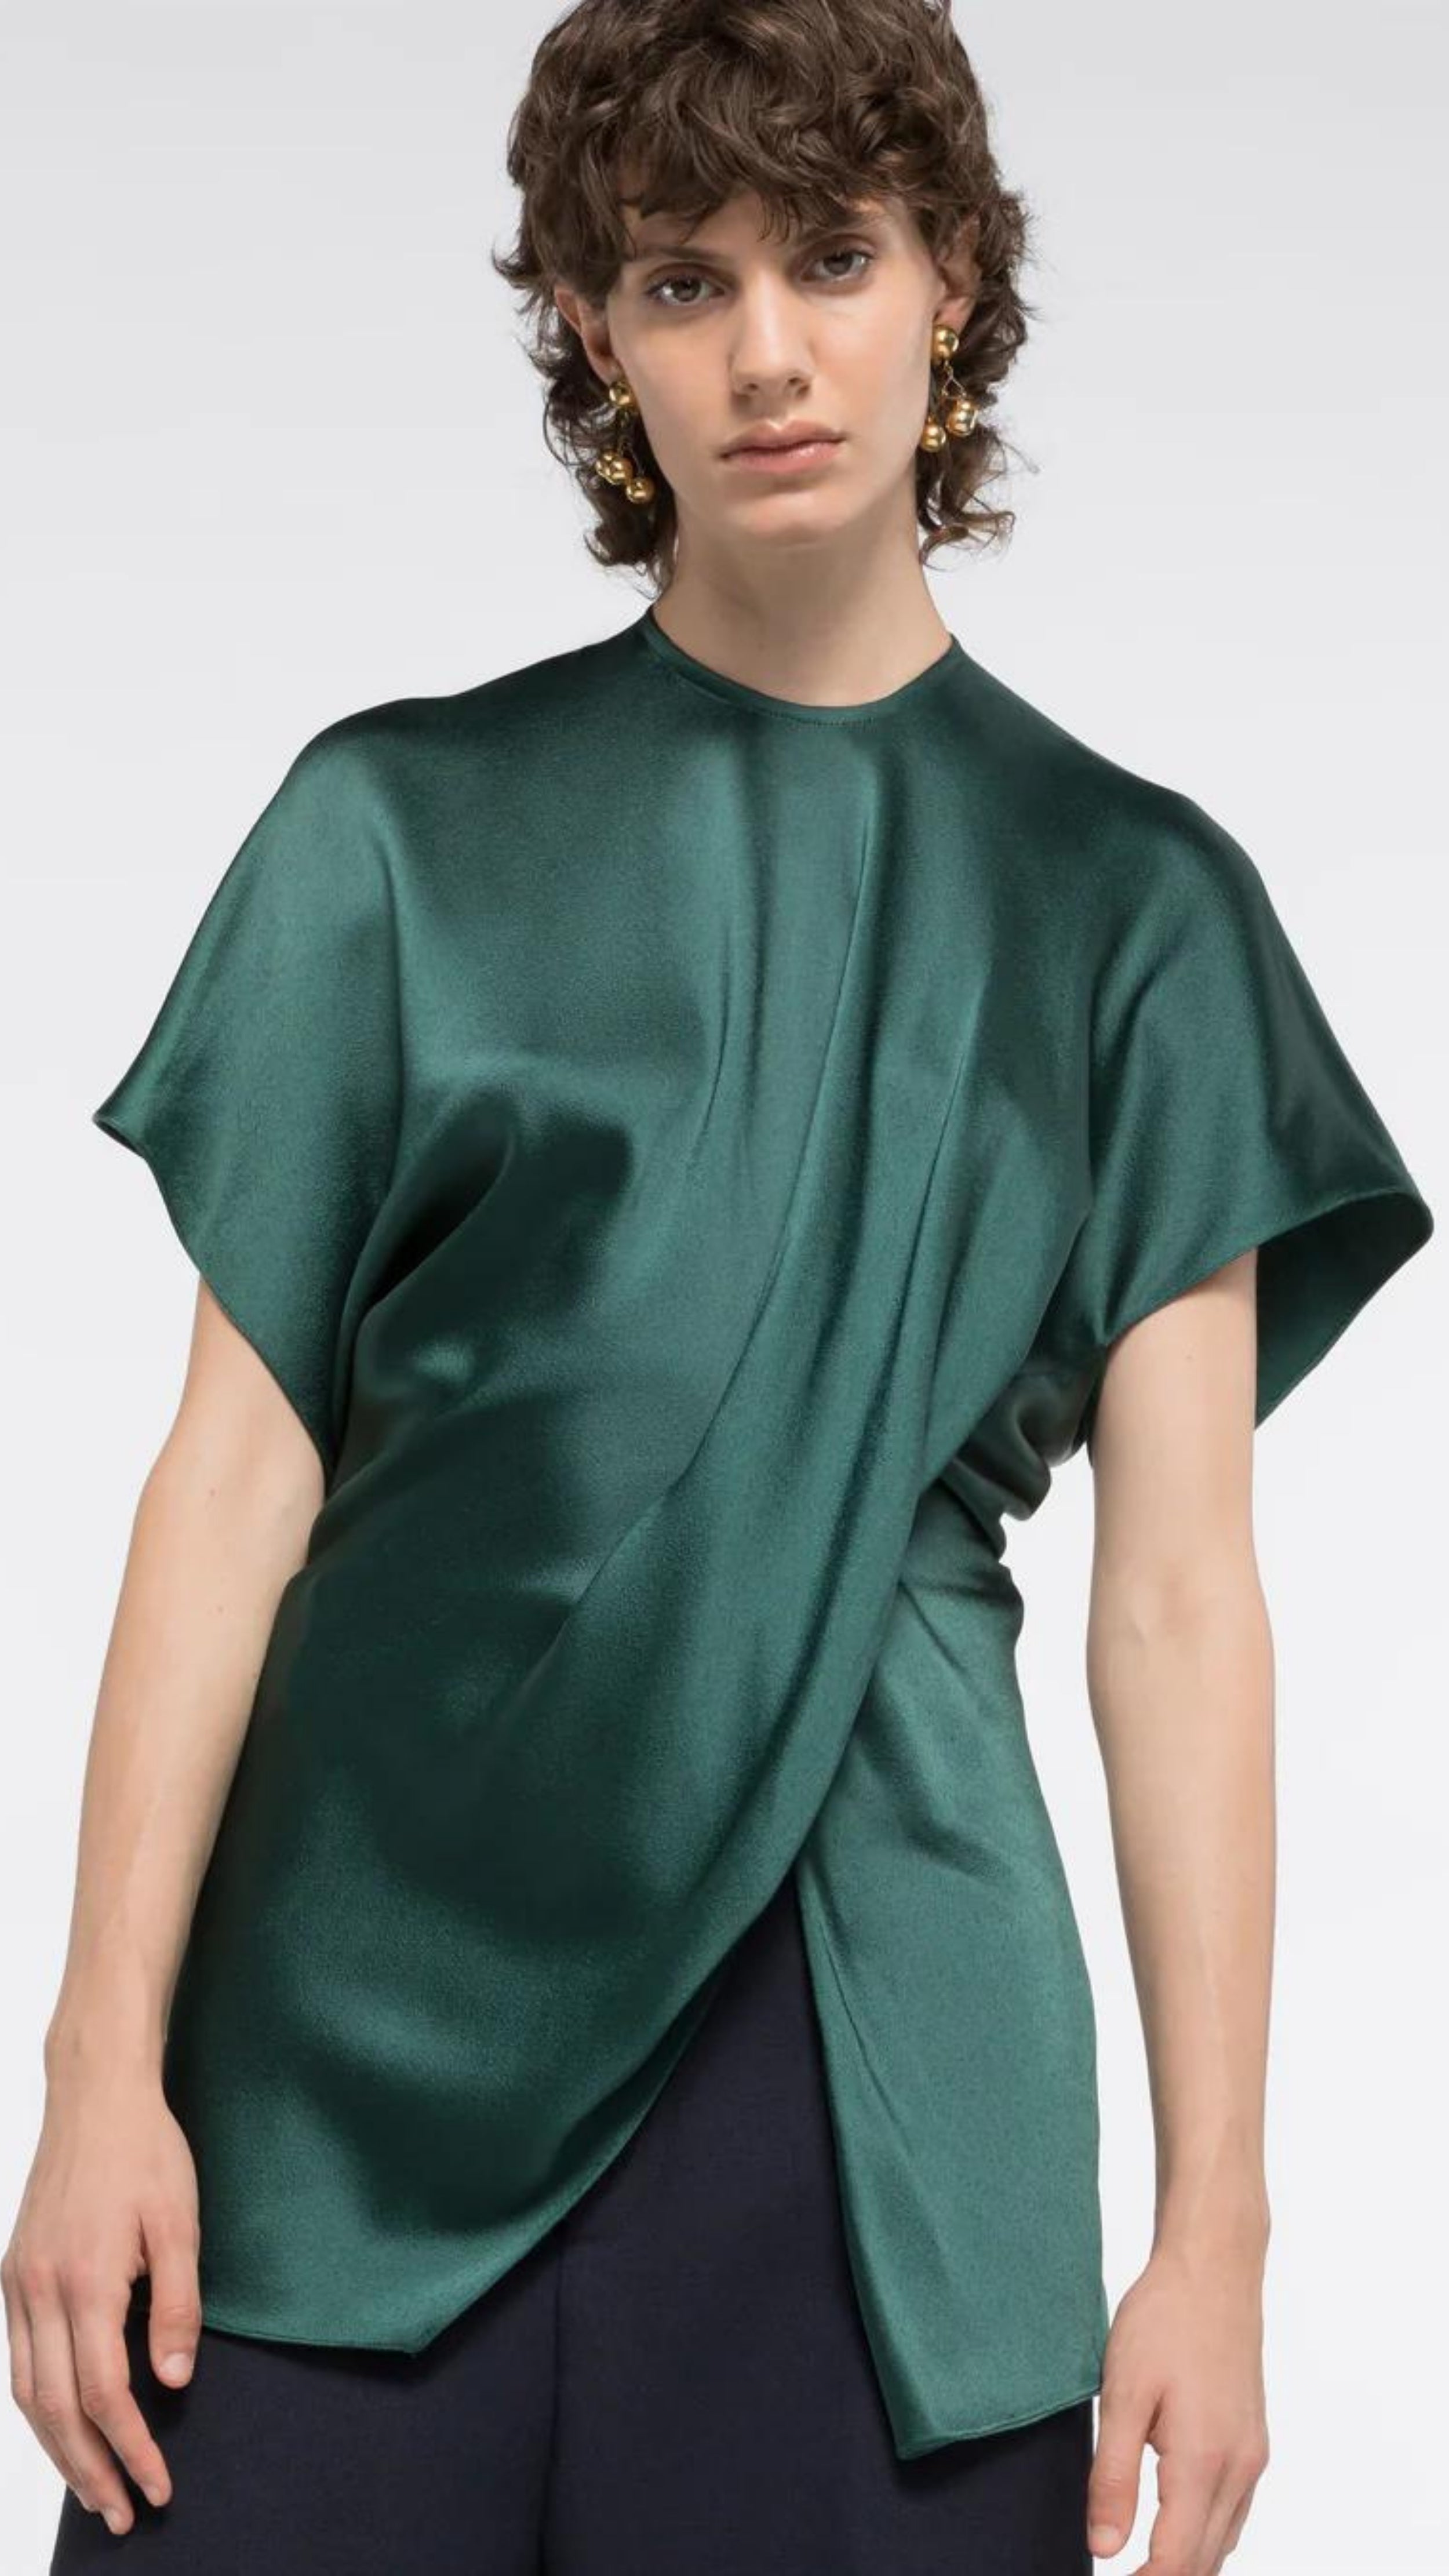 AZ Factory Colville Molly Molloy Lucinda Chambers, Asymmetric Satin Tee Shirt. Elegantly draped in forest green satin material in a classic tee shirt shape. Shown on model facing forward and close up.